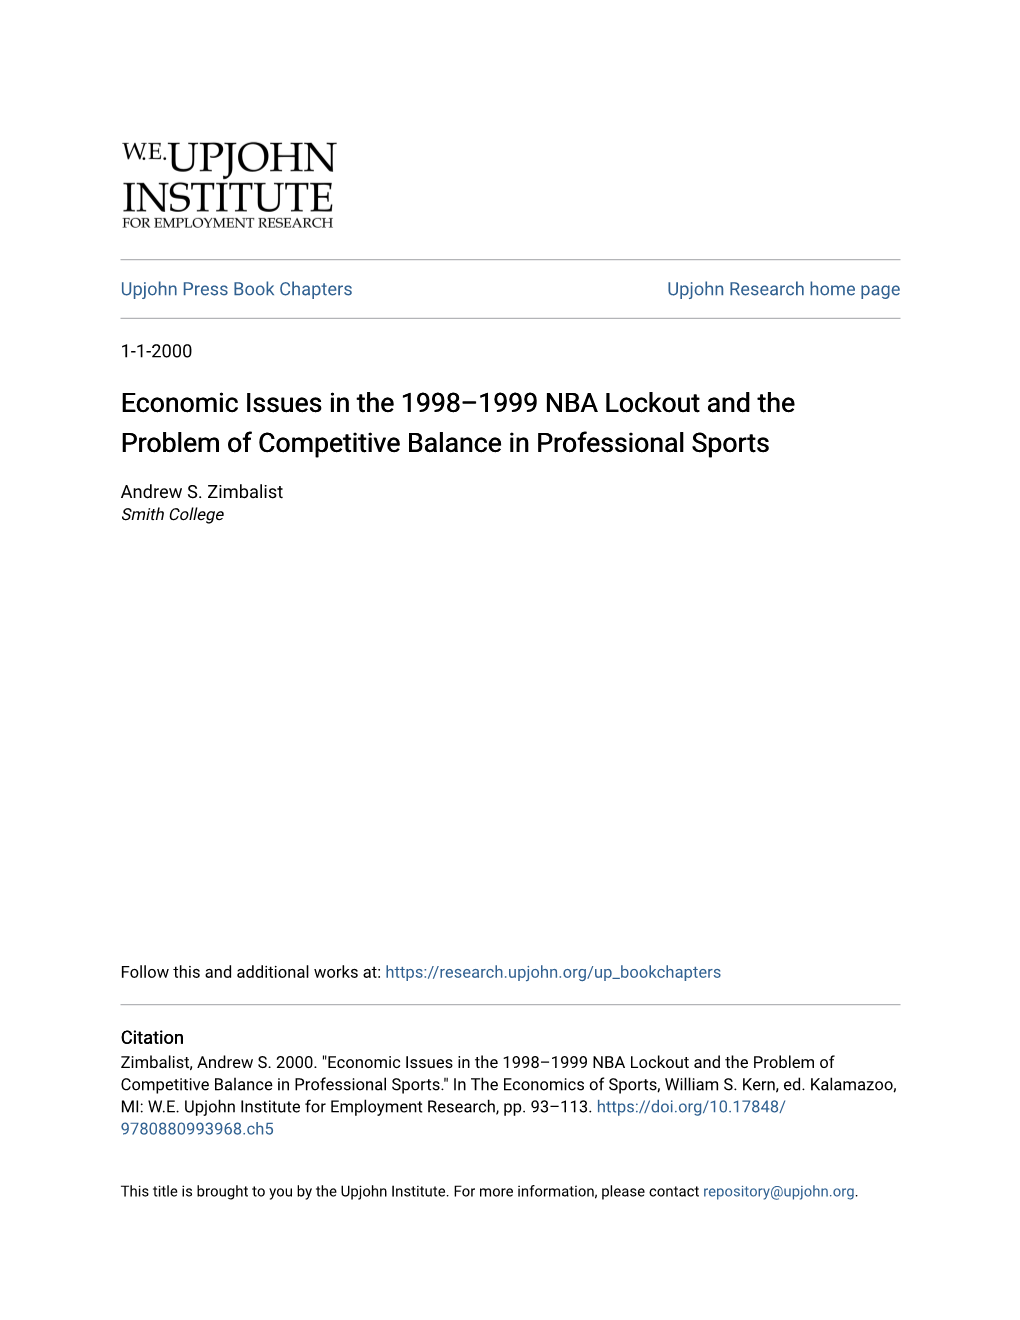 Economic Issues in the 1998–1999 NBA Lockout and the Problem of Competitive Balance in Professional Sports